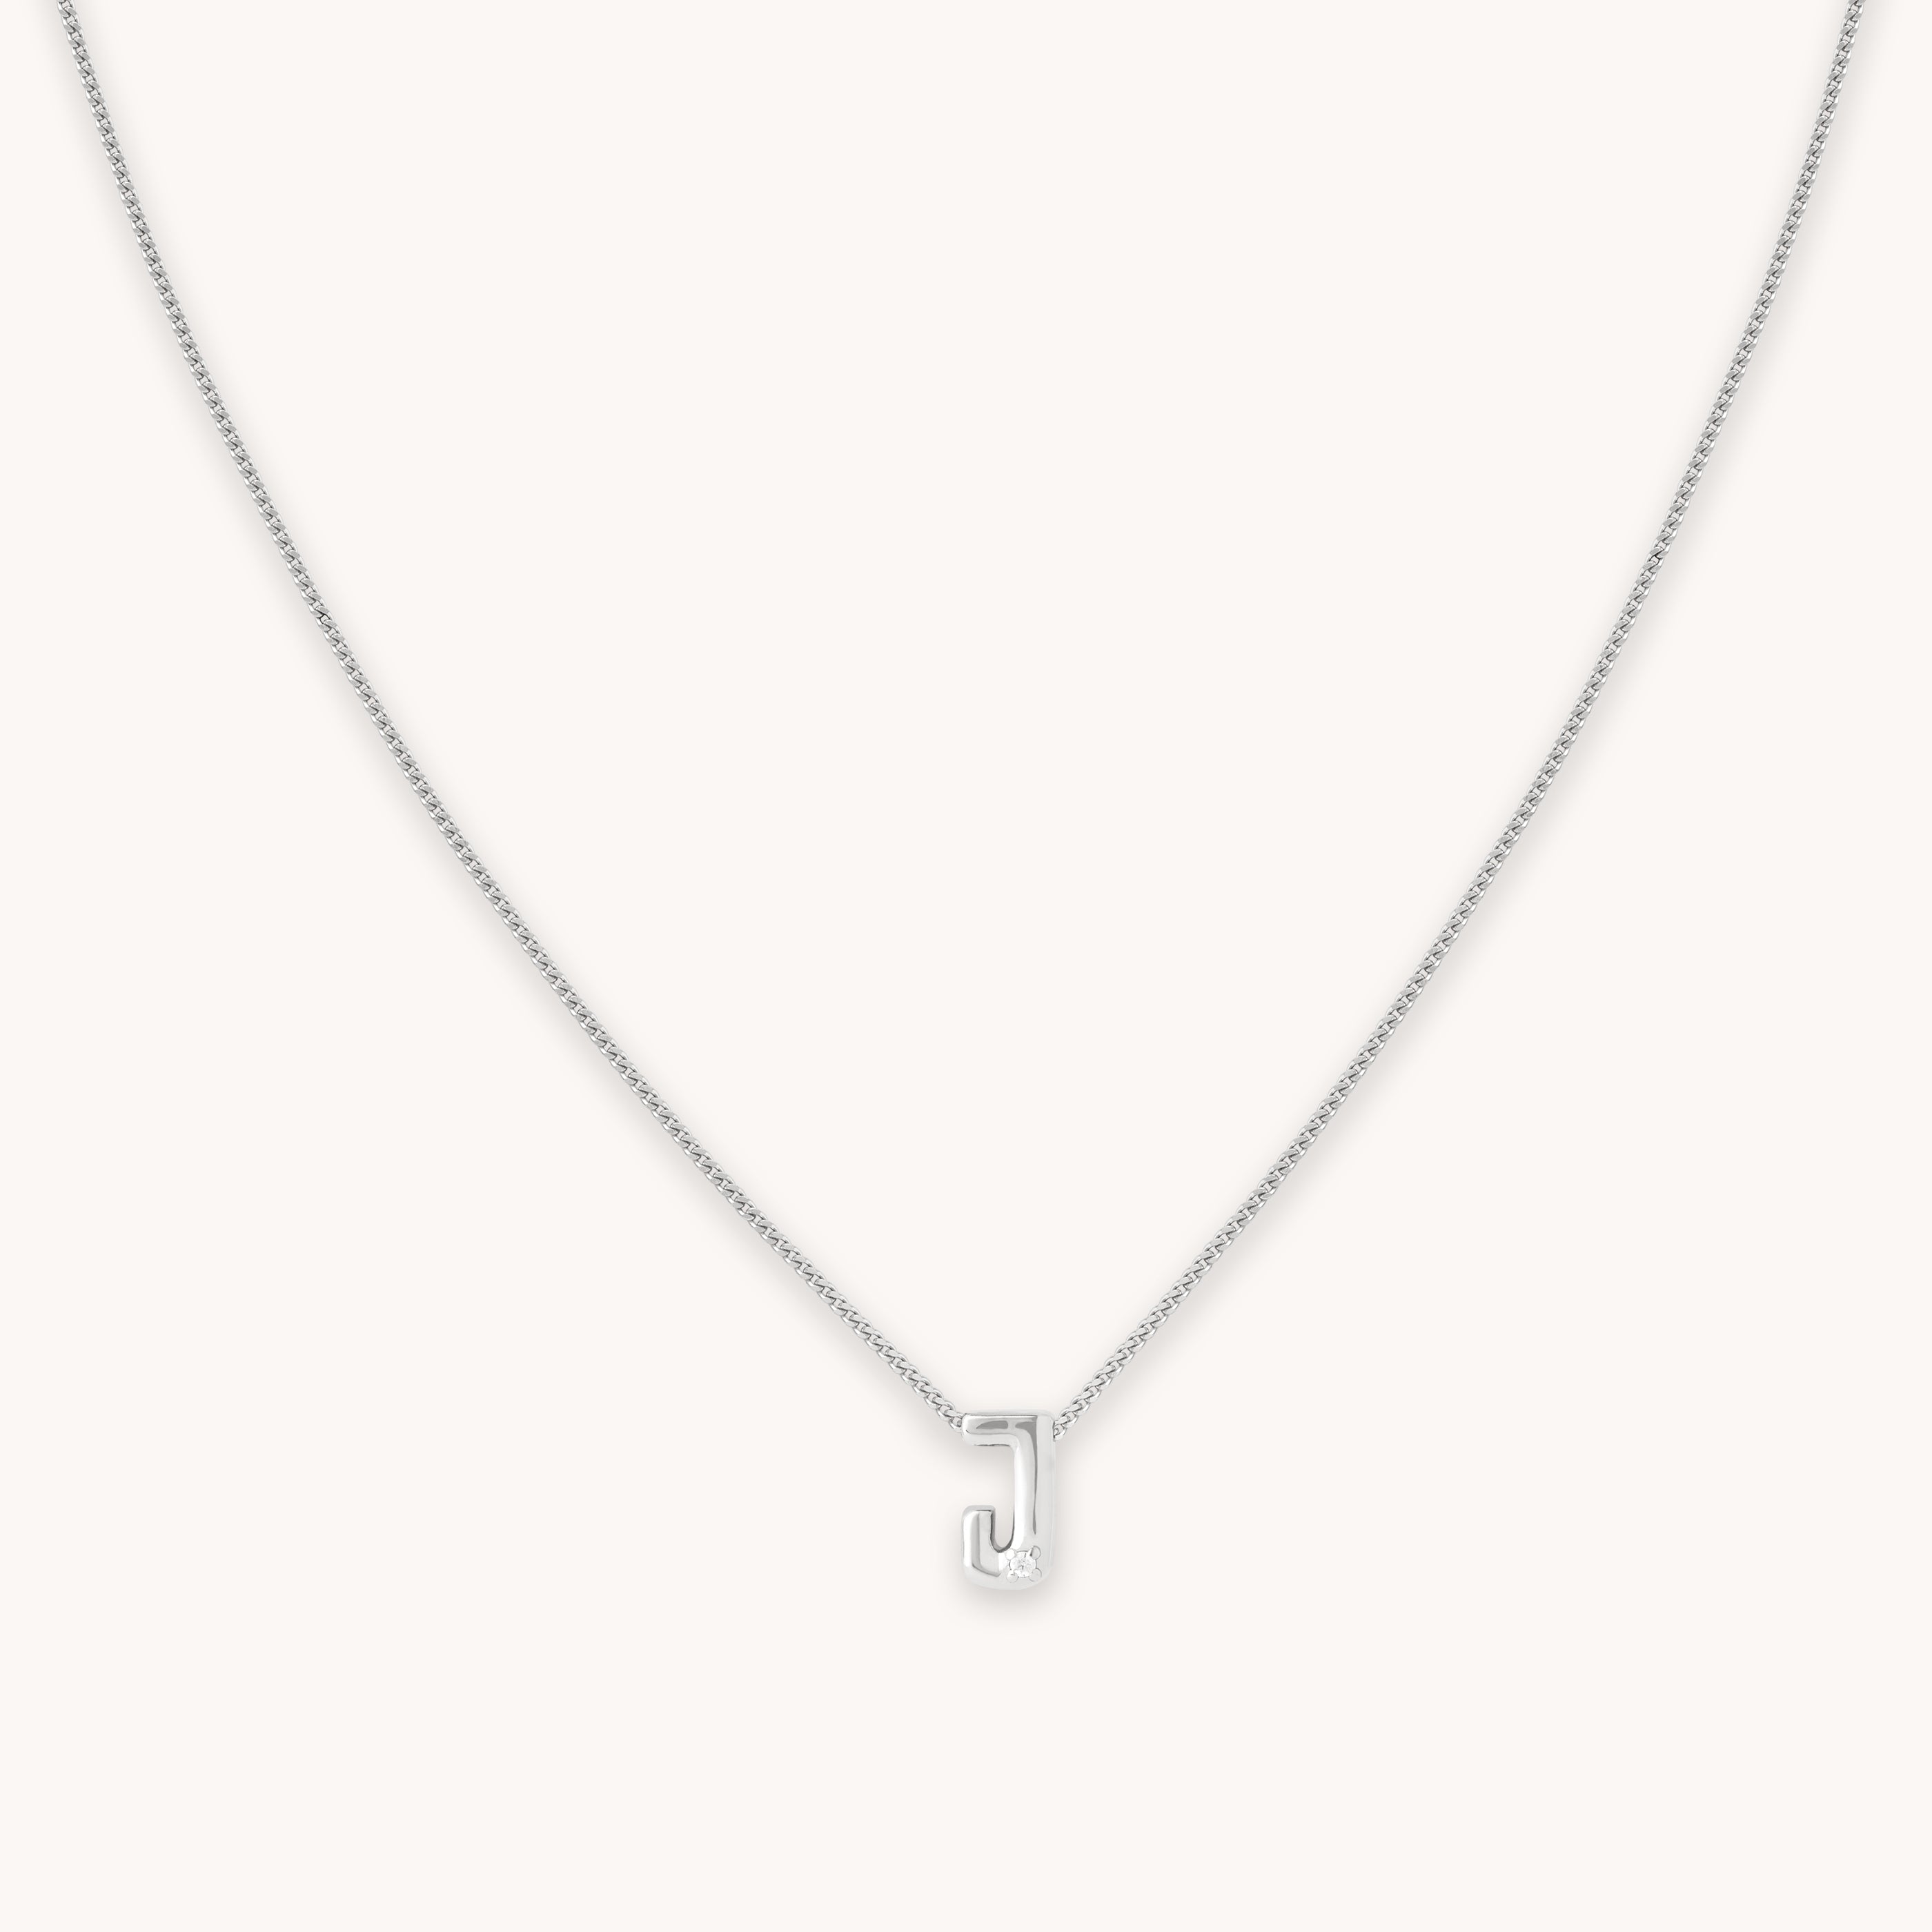 J Initial Pendant Necklace in Silver